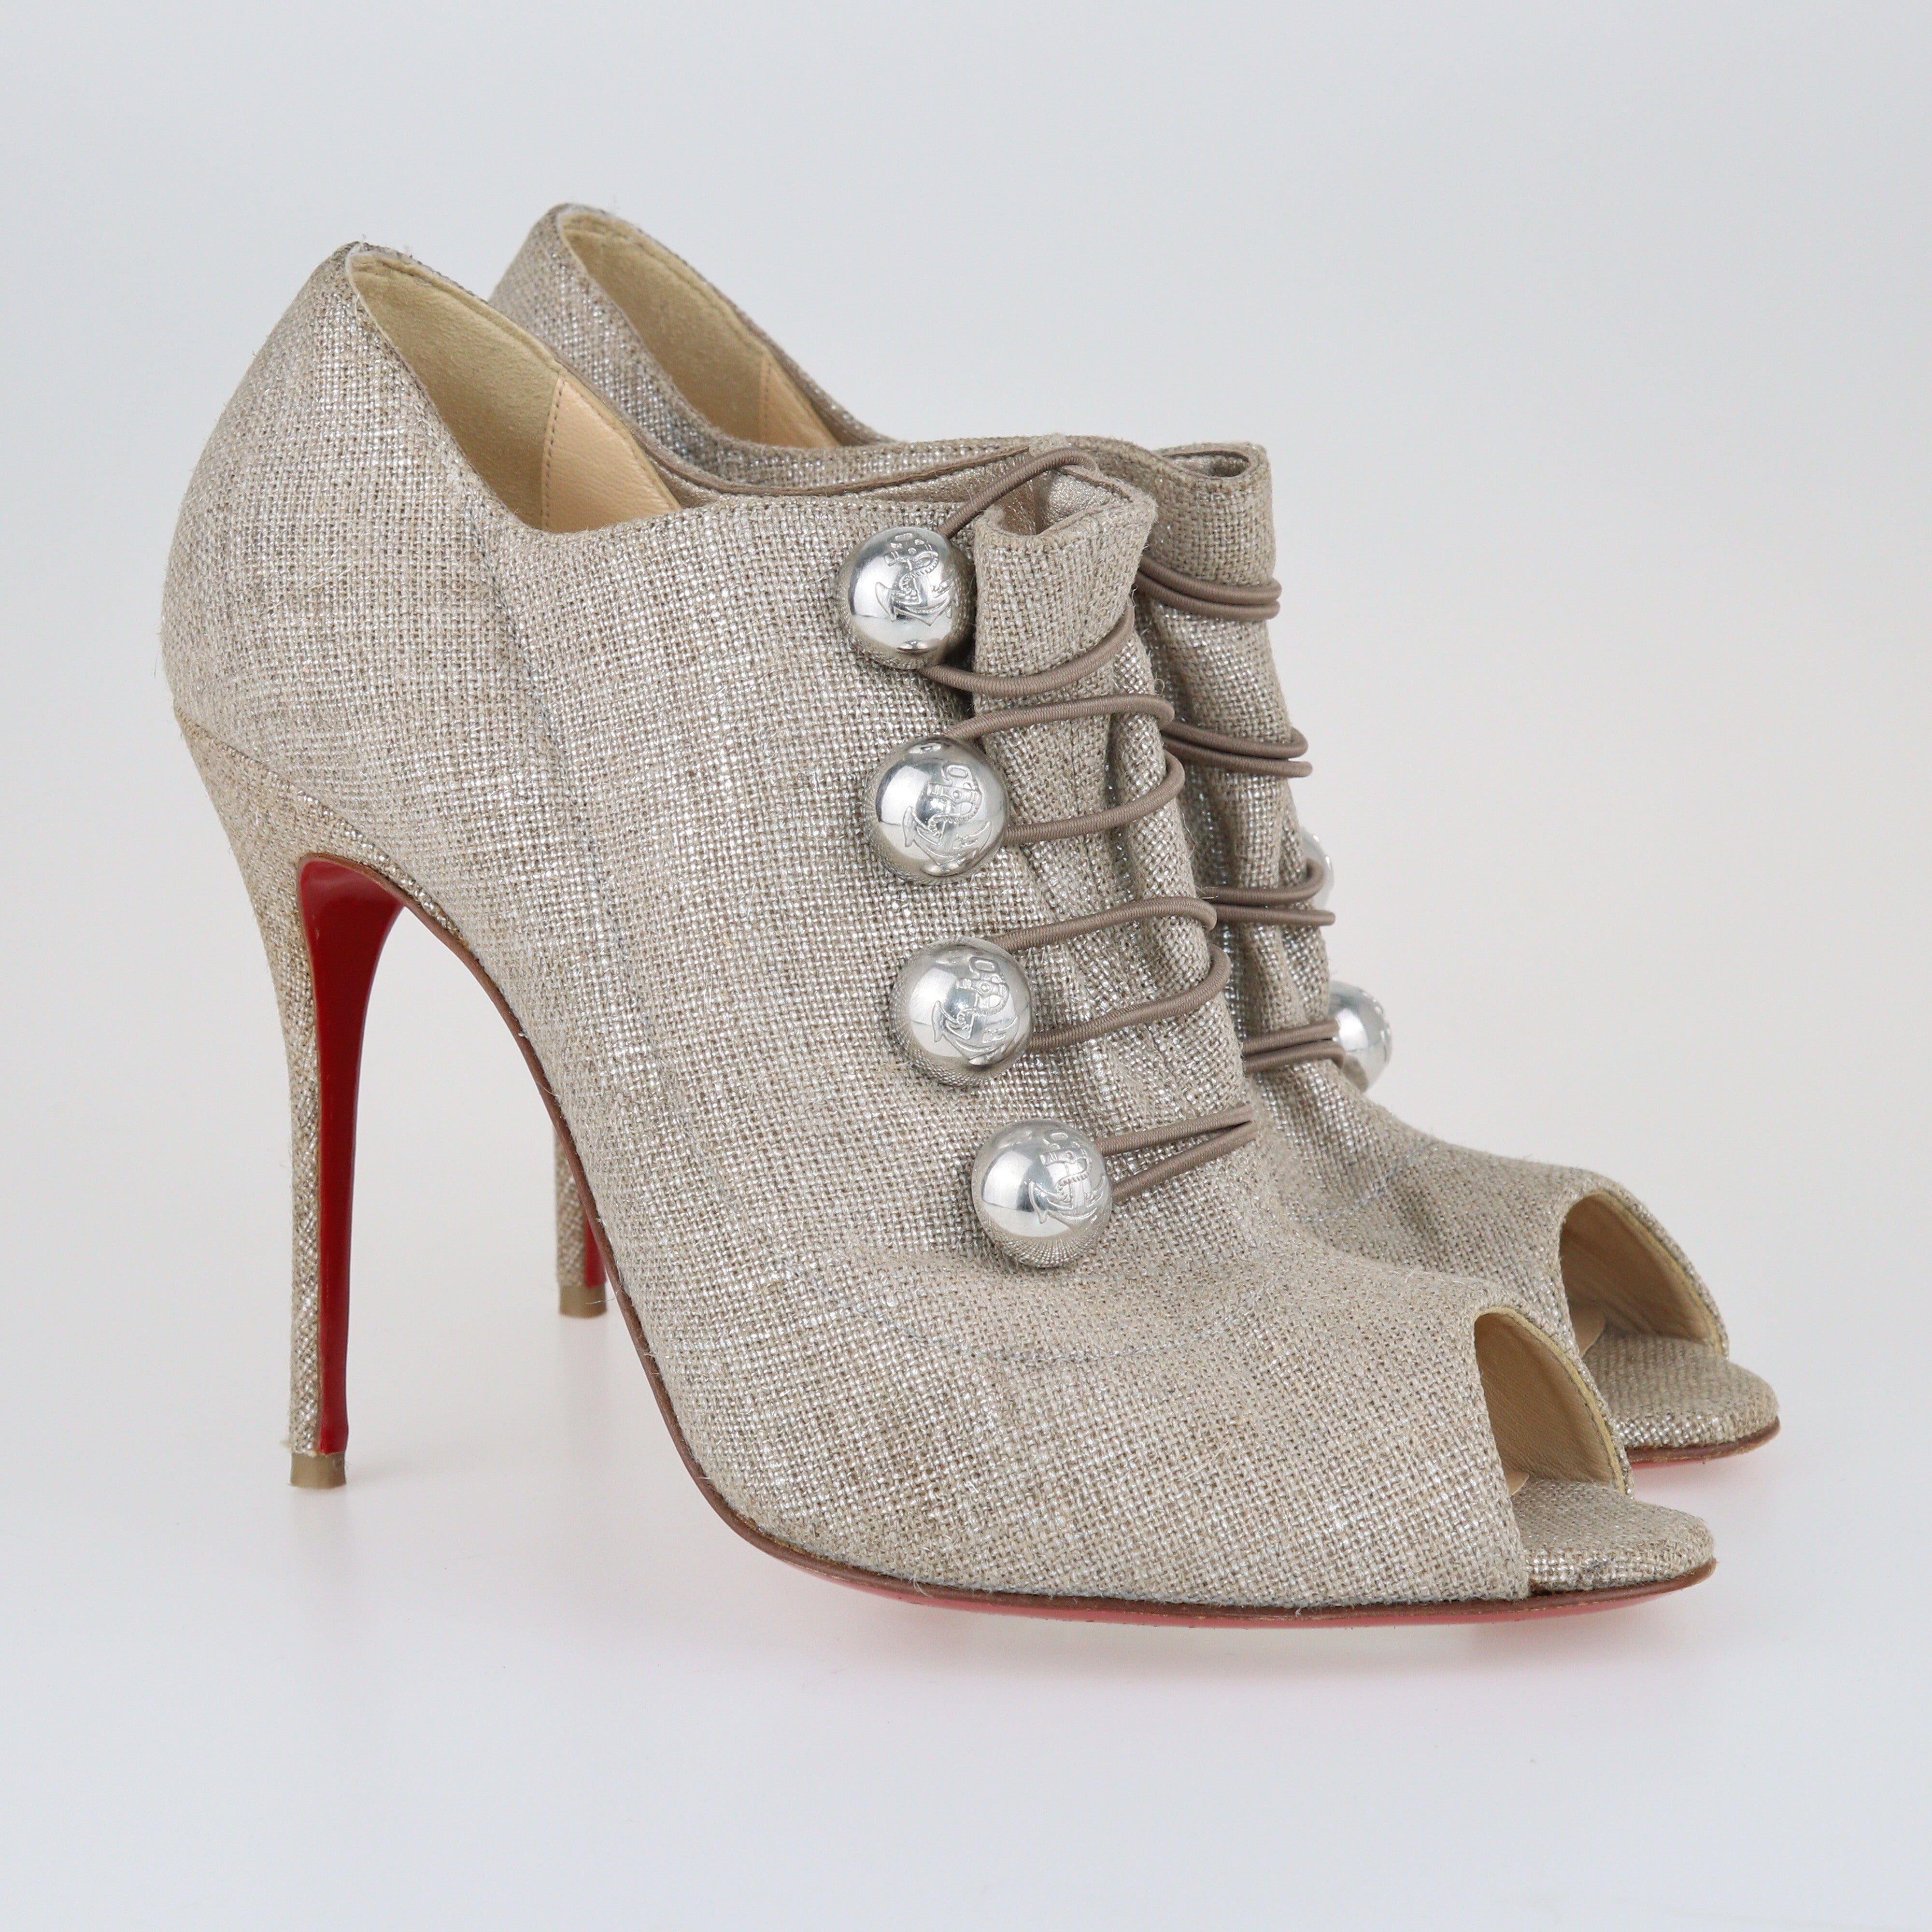 Beige Ankle Booties Shoes Christian Louboutin 